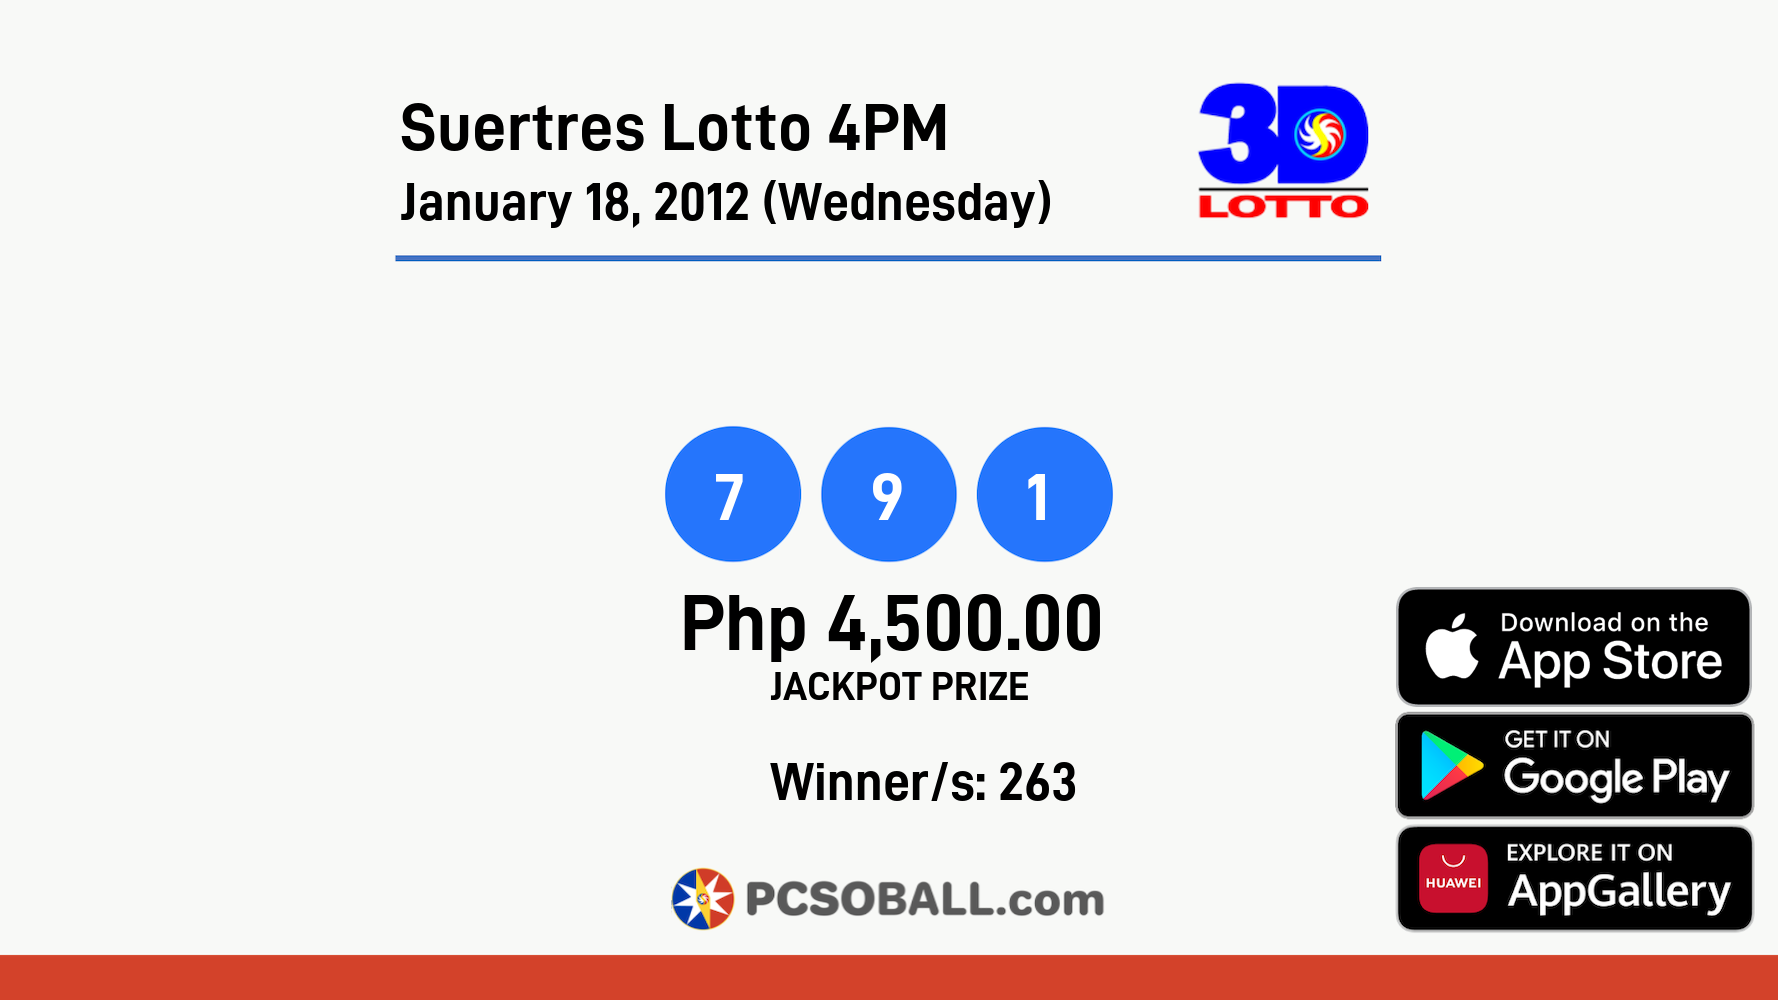 Suertres Lotto 4PM January 18, 2012 (Wednesday) Result